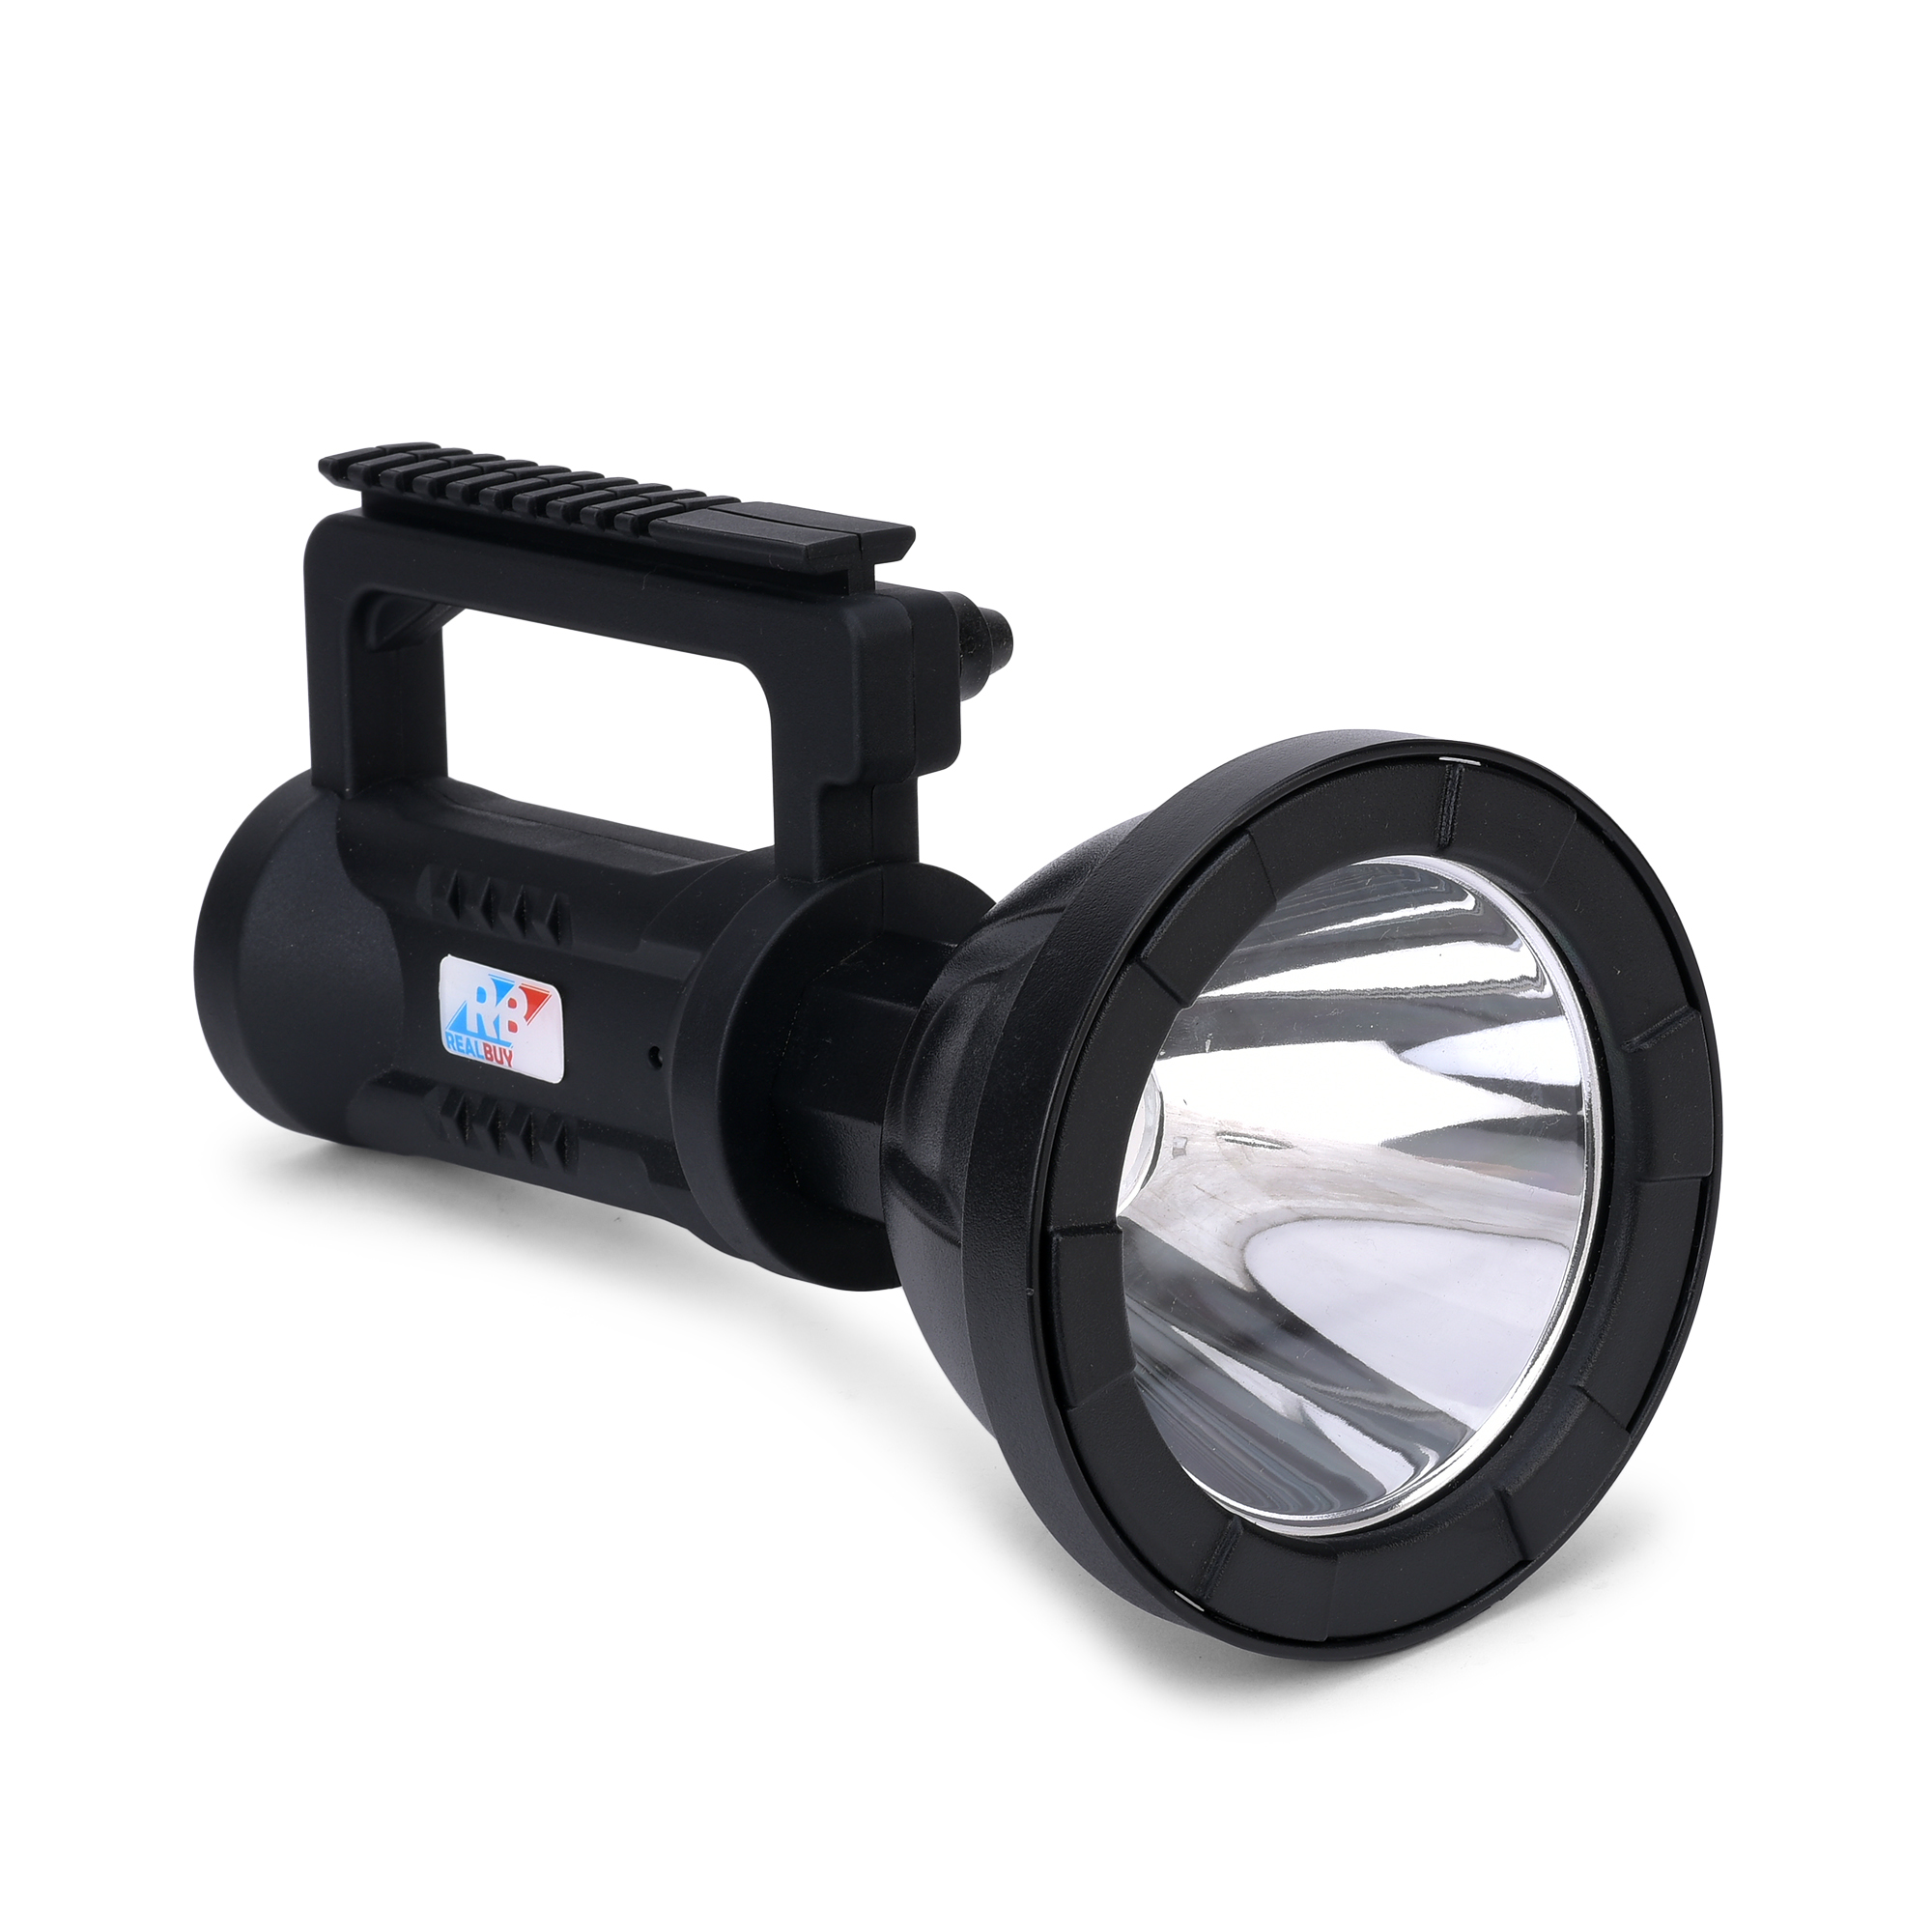 Realbuy Led Search Light 10w (Range 1 Km.) With 4000 Mah Lithium Battery (Ip65 Water proof)